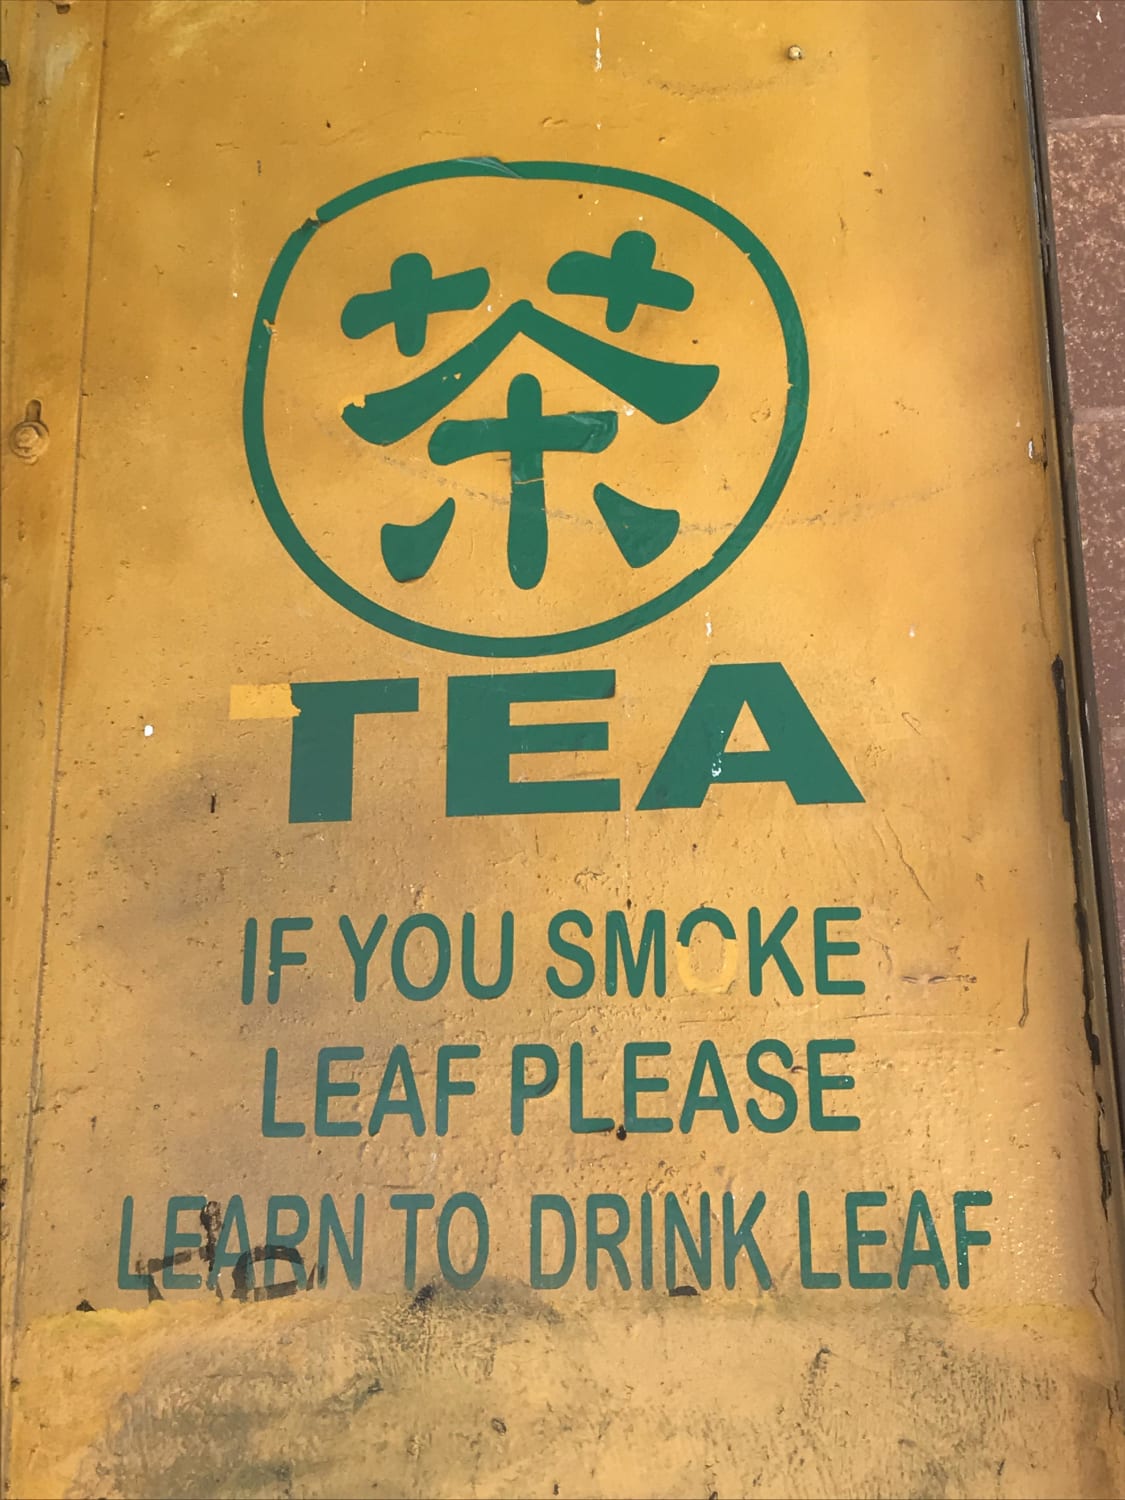 Please learn to drink leaf